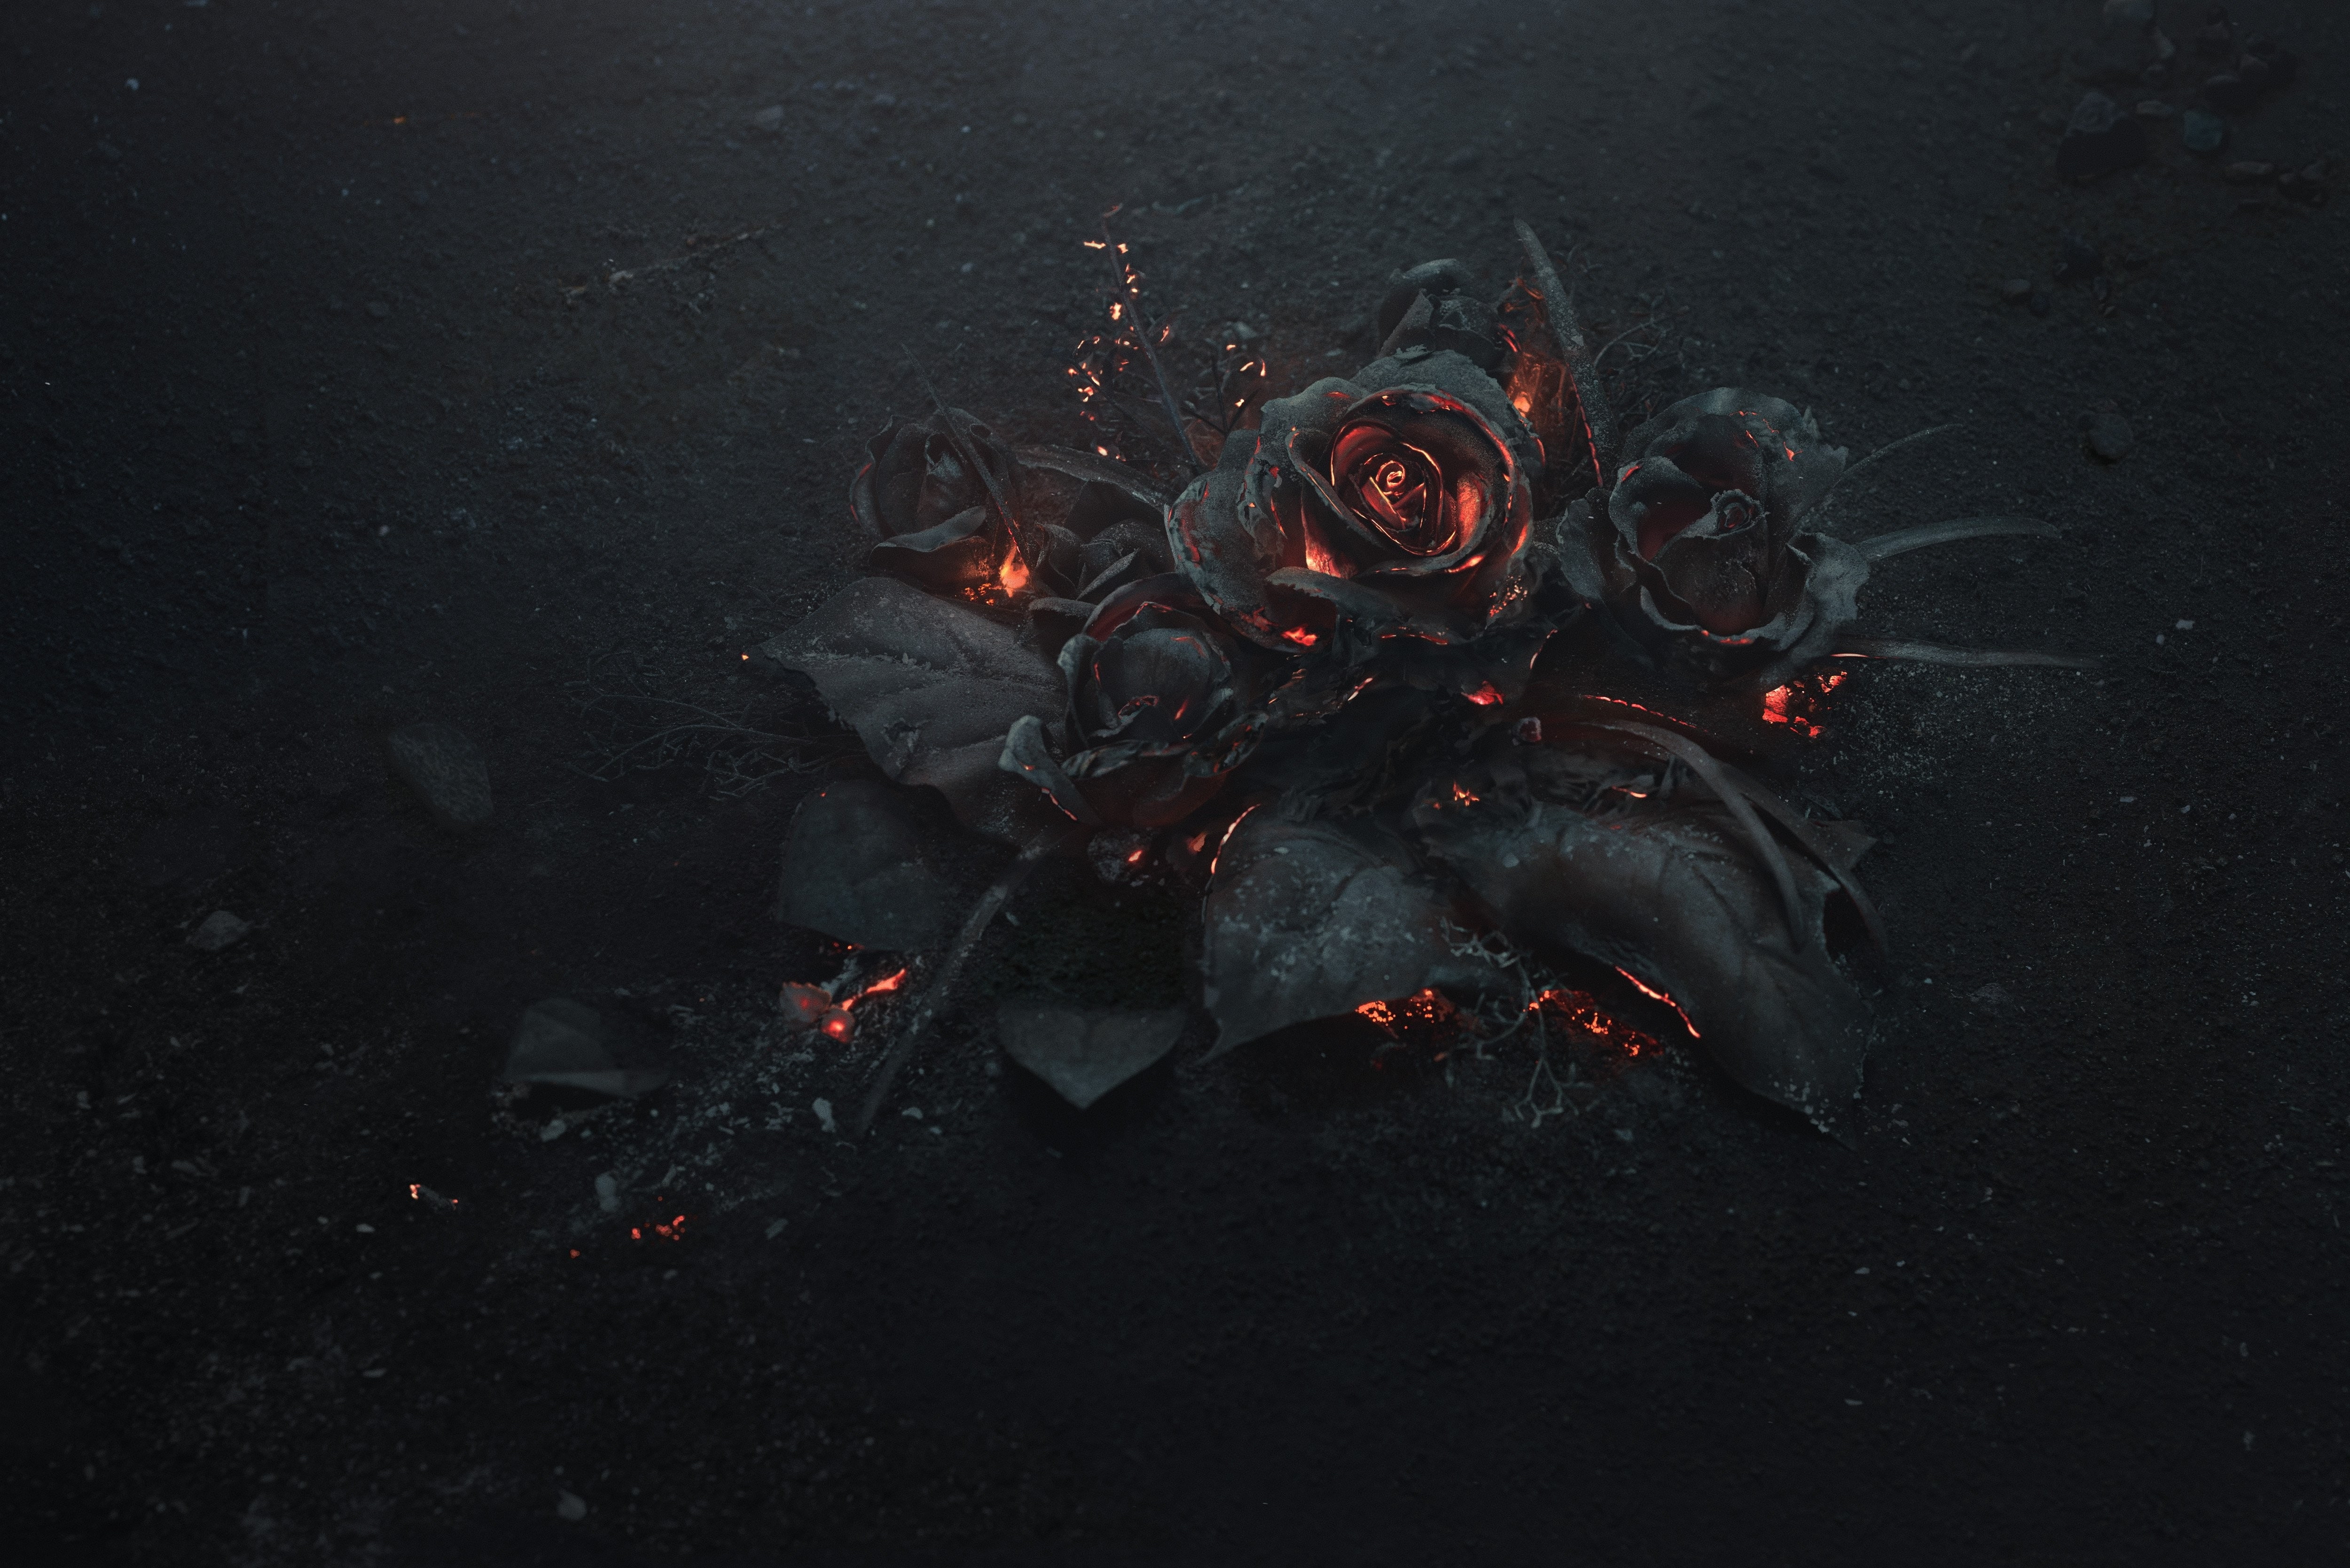 rose ashes, fire, black, dark theme, Flowers, no people, burning